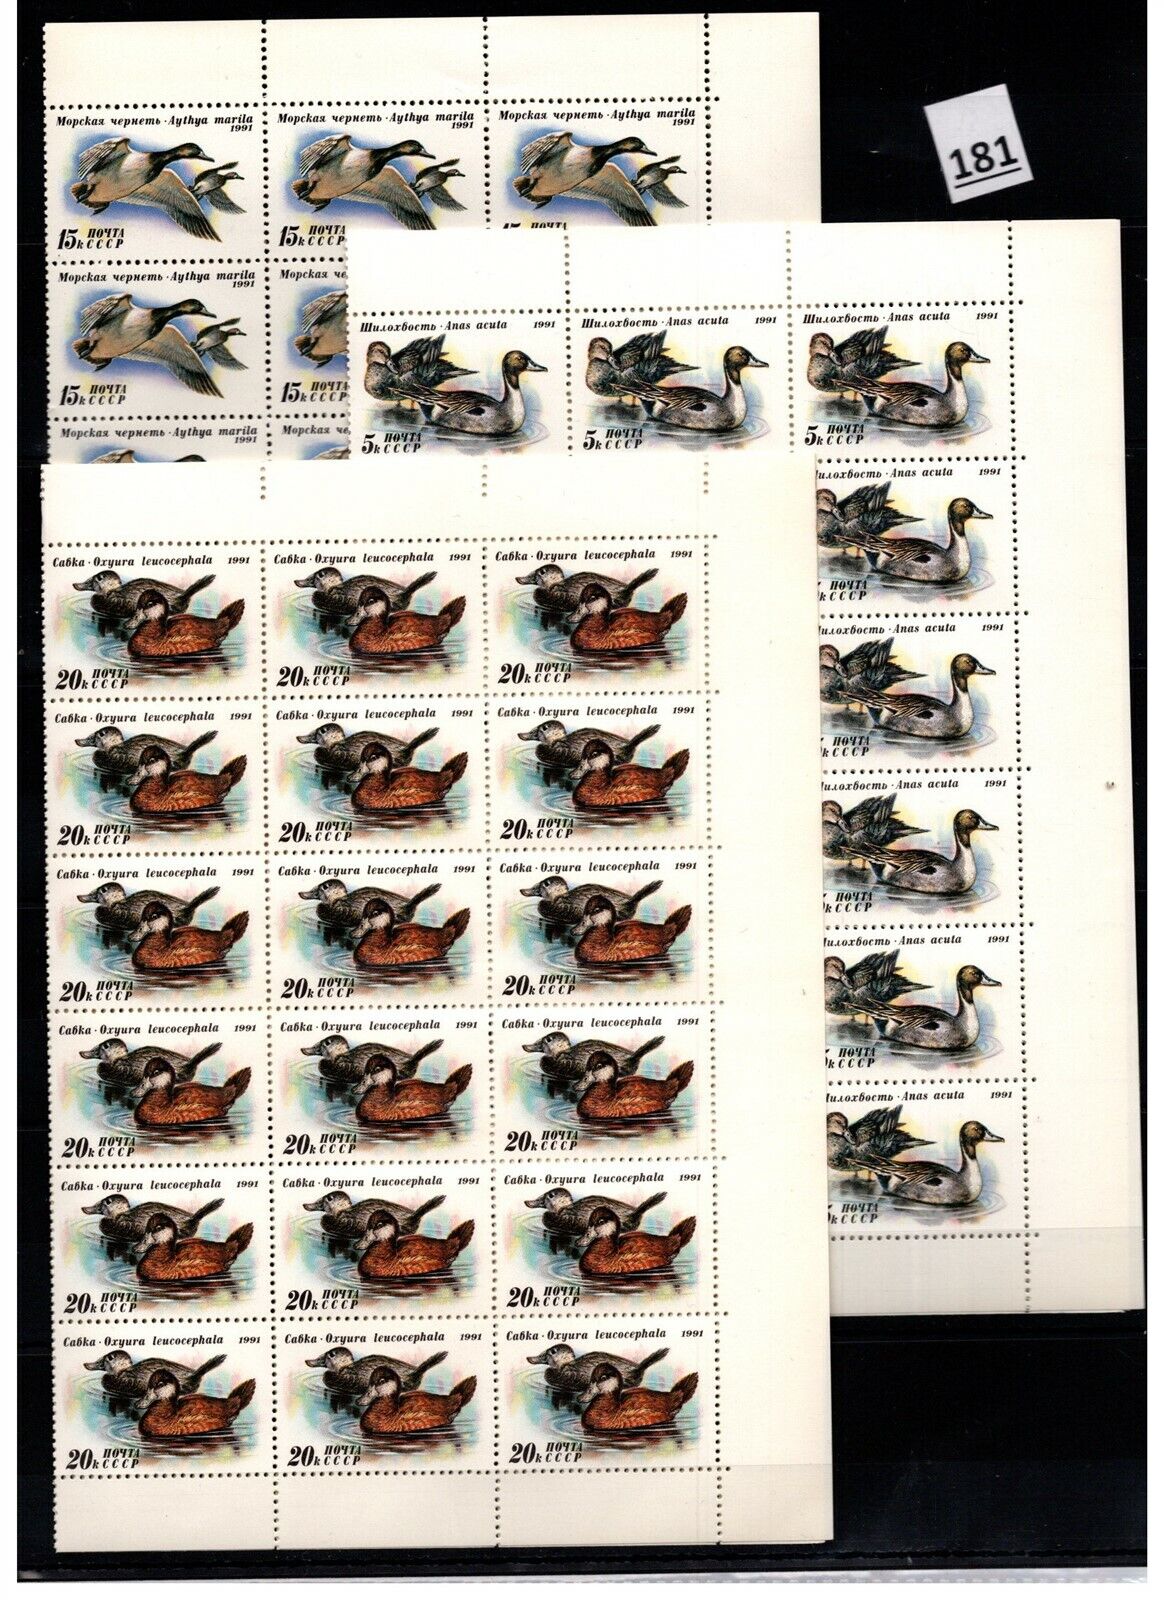 36X RUSSIA - MNH SHEETS Large-scale sale 1991 BIRDS security DUCKS WHOL BENT